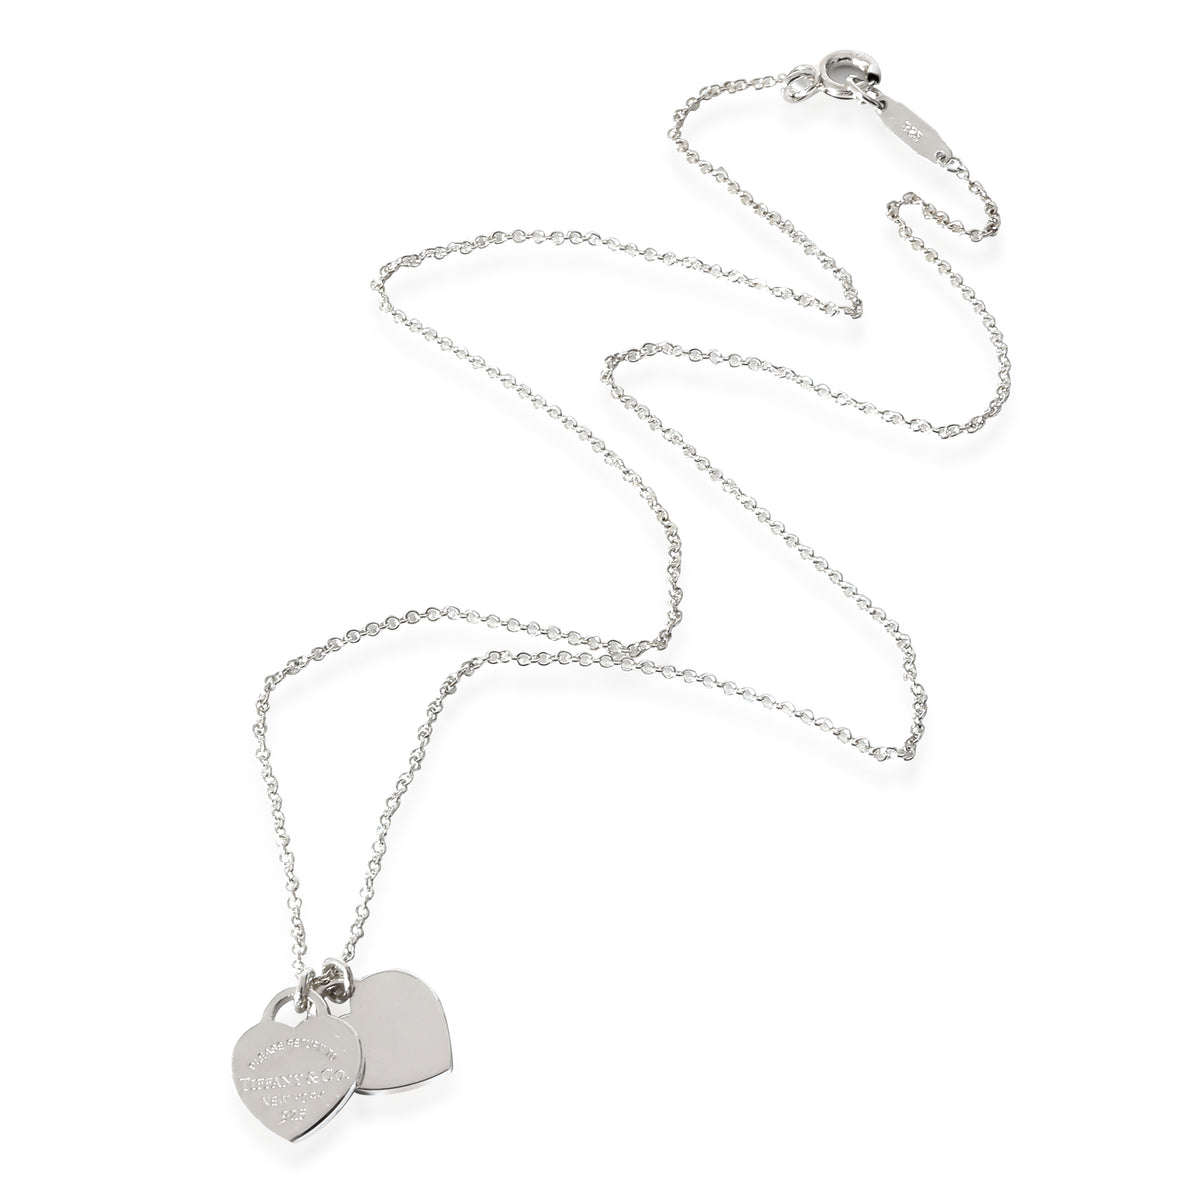 Tiffany & Co. Return To Tiffany Double Heart Tag Pendant in Sterling Silver